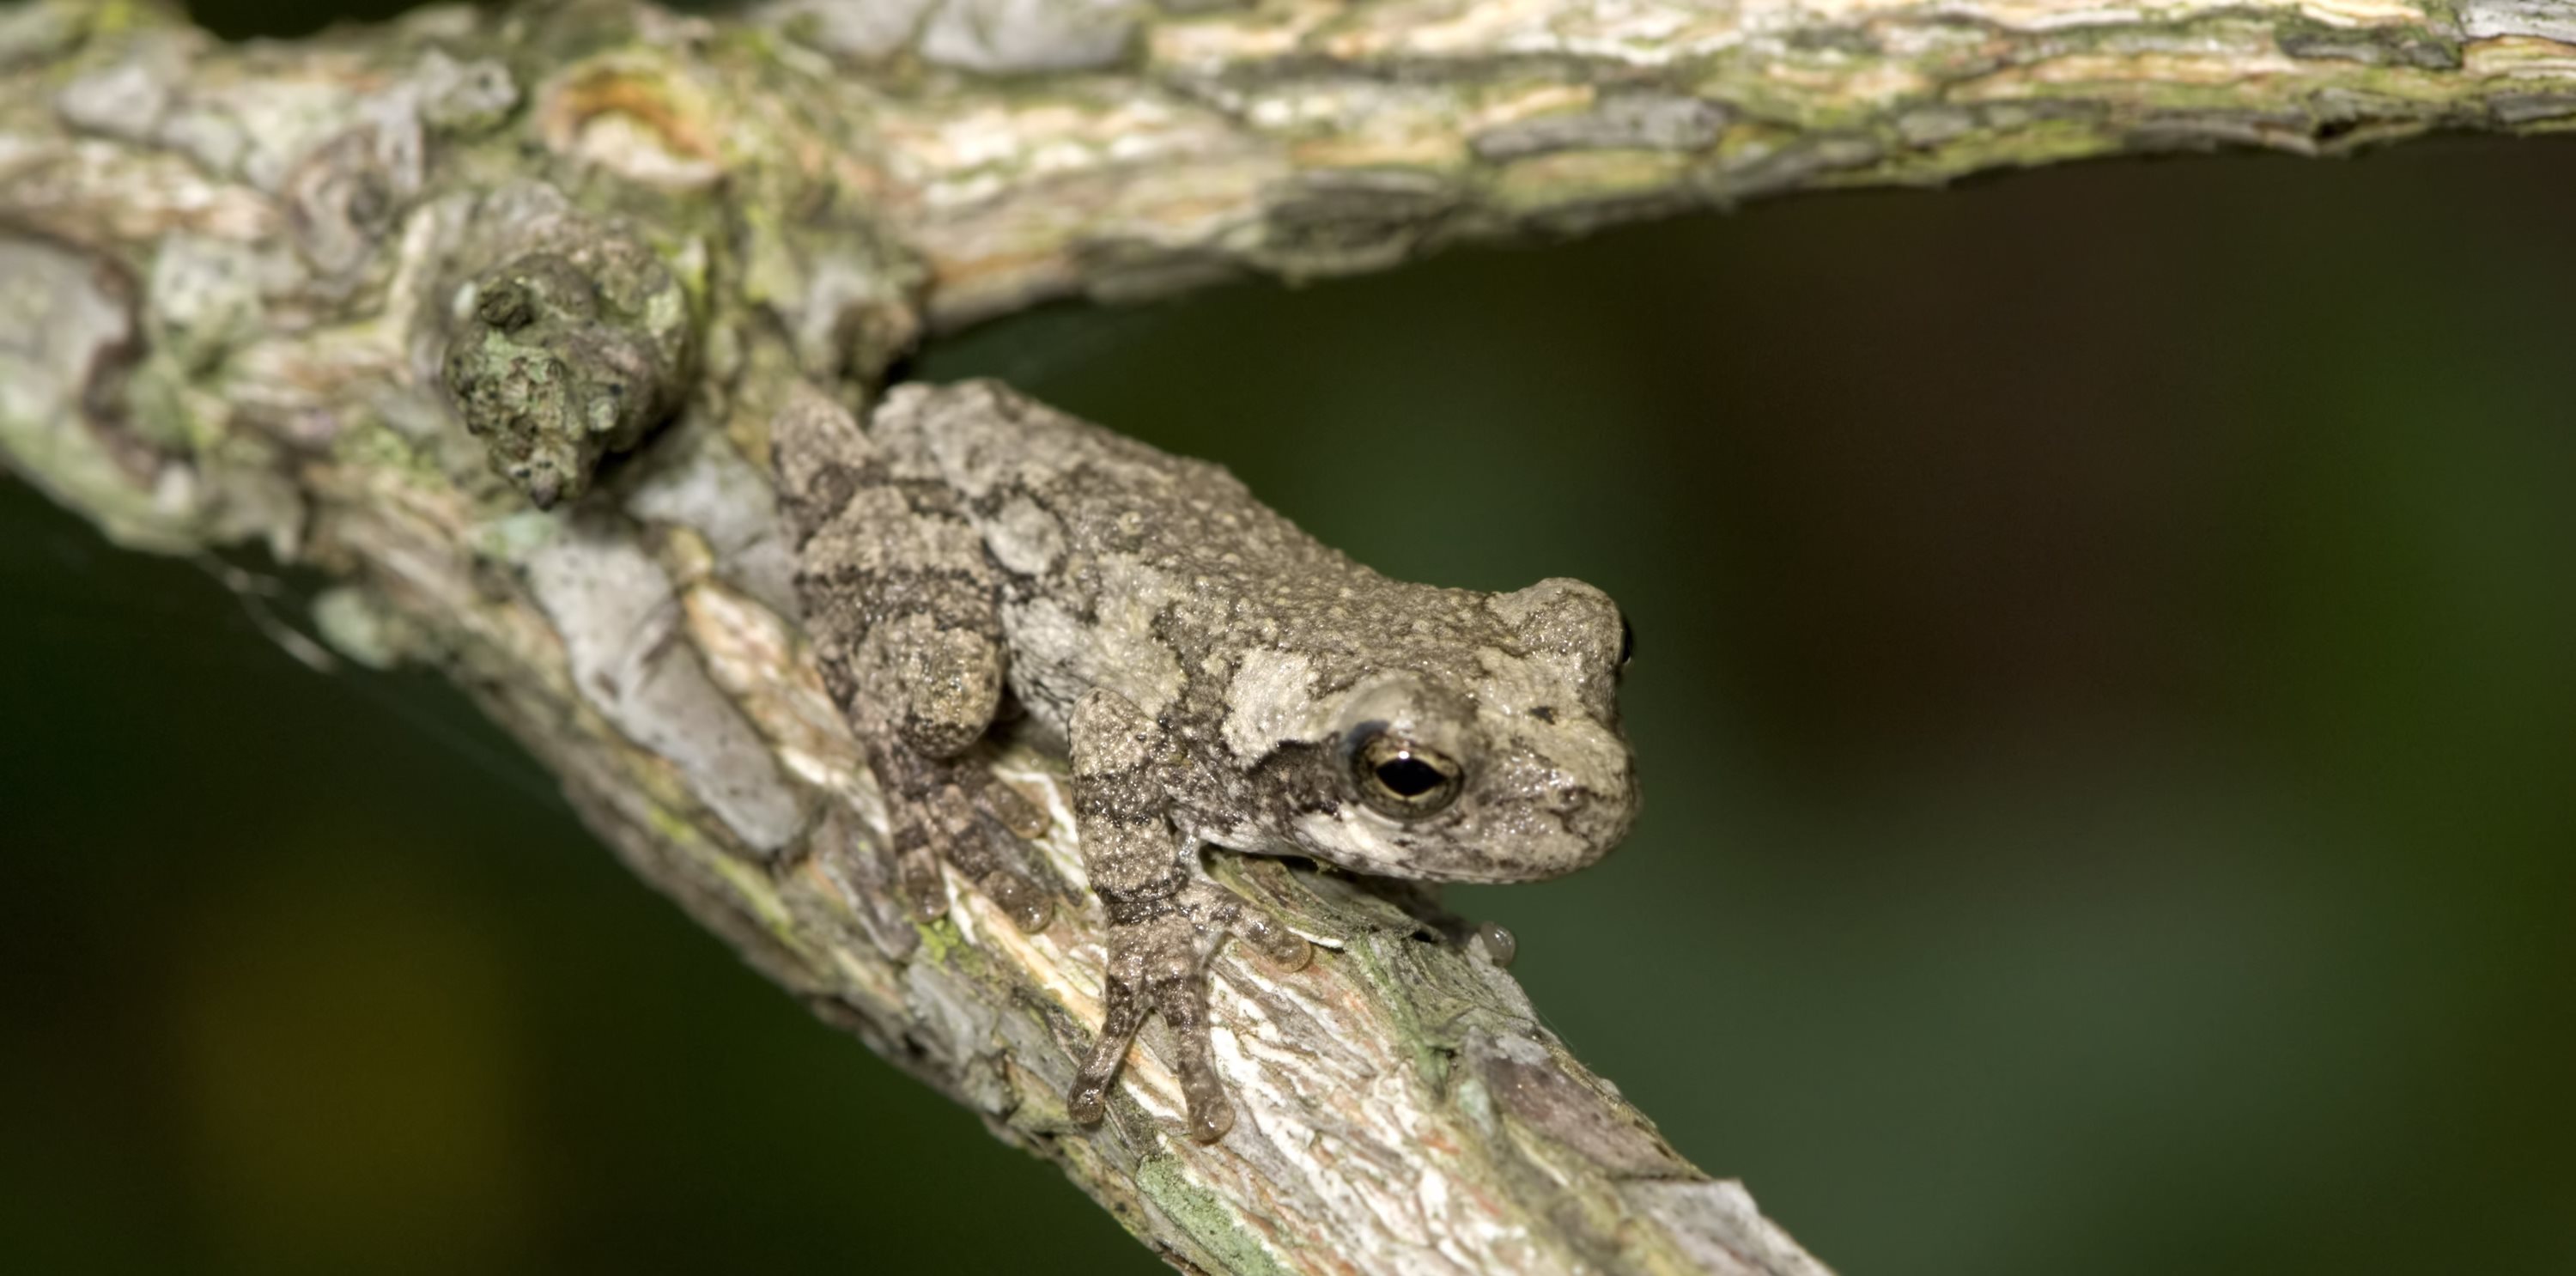 A gray tree frog blending in with tree bark.